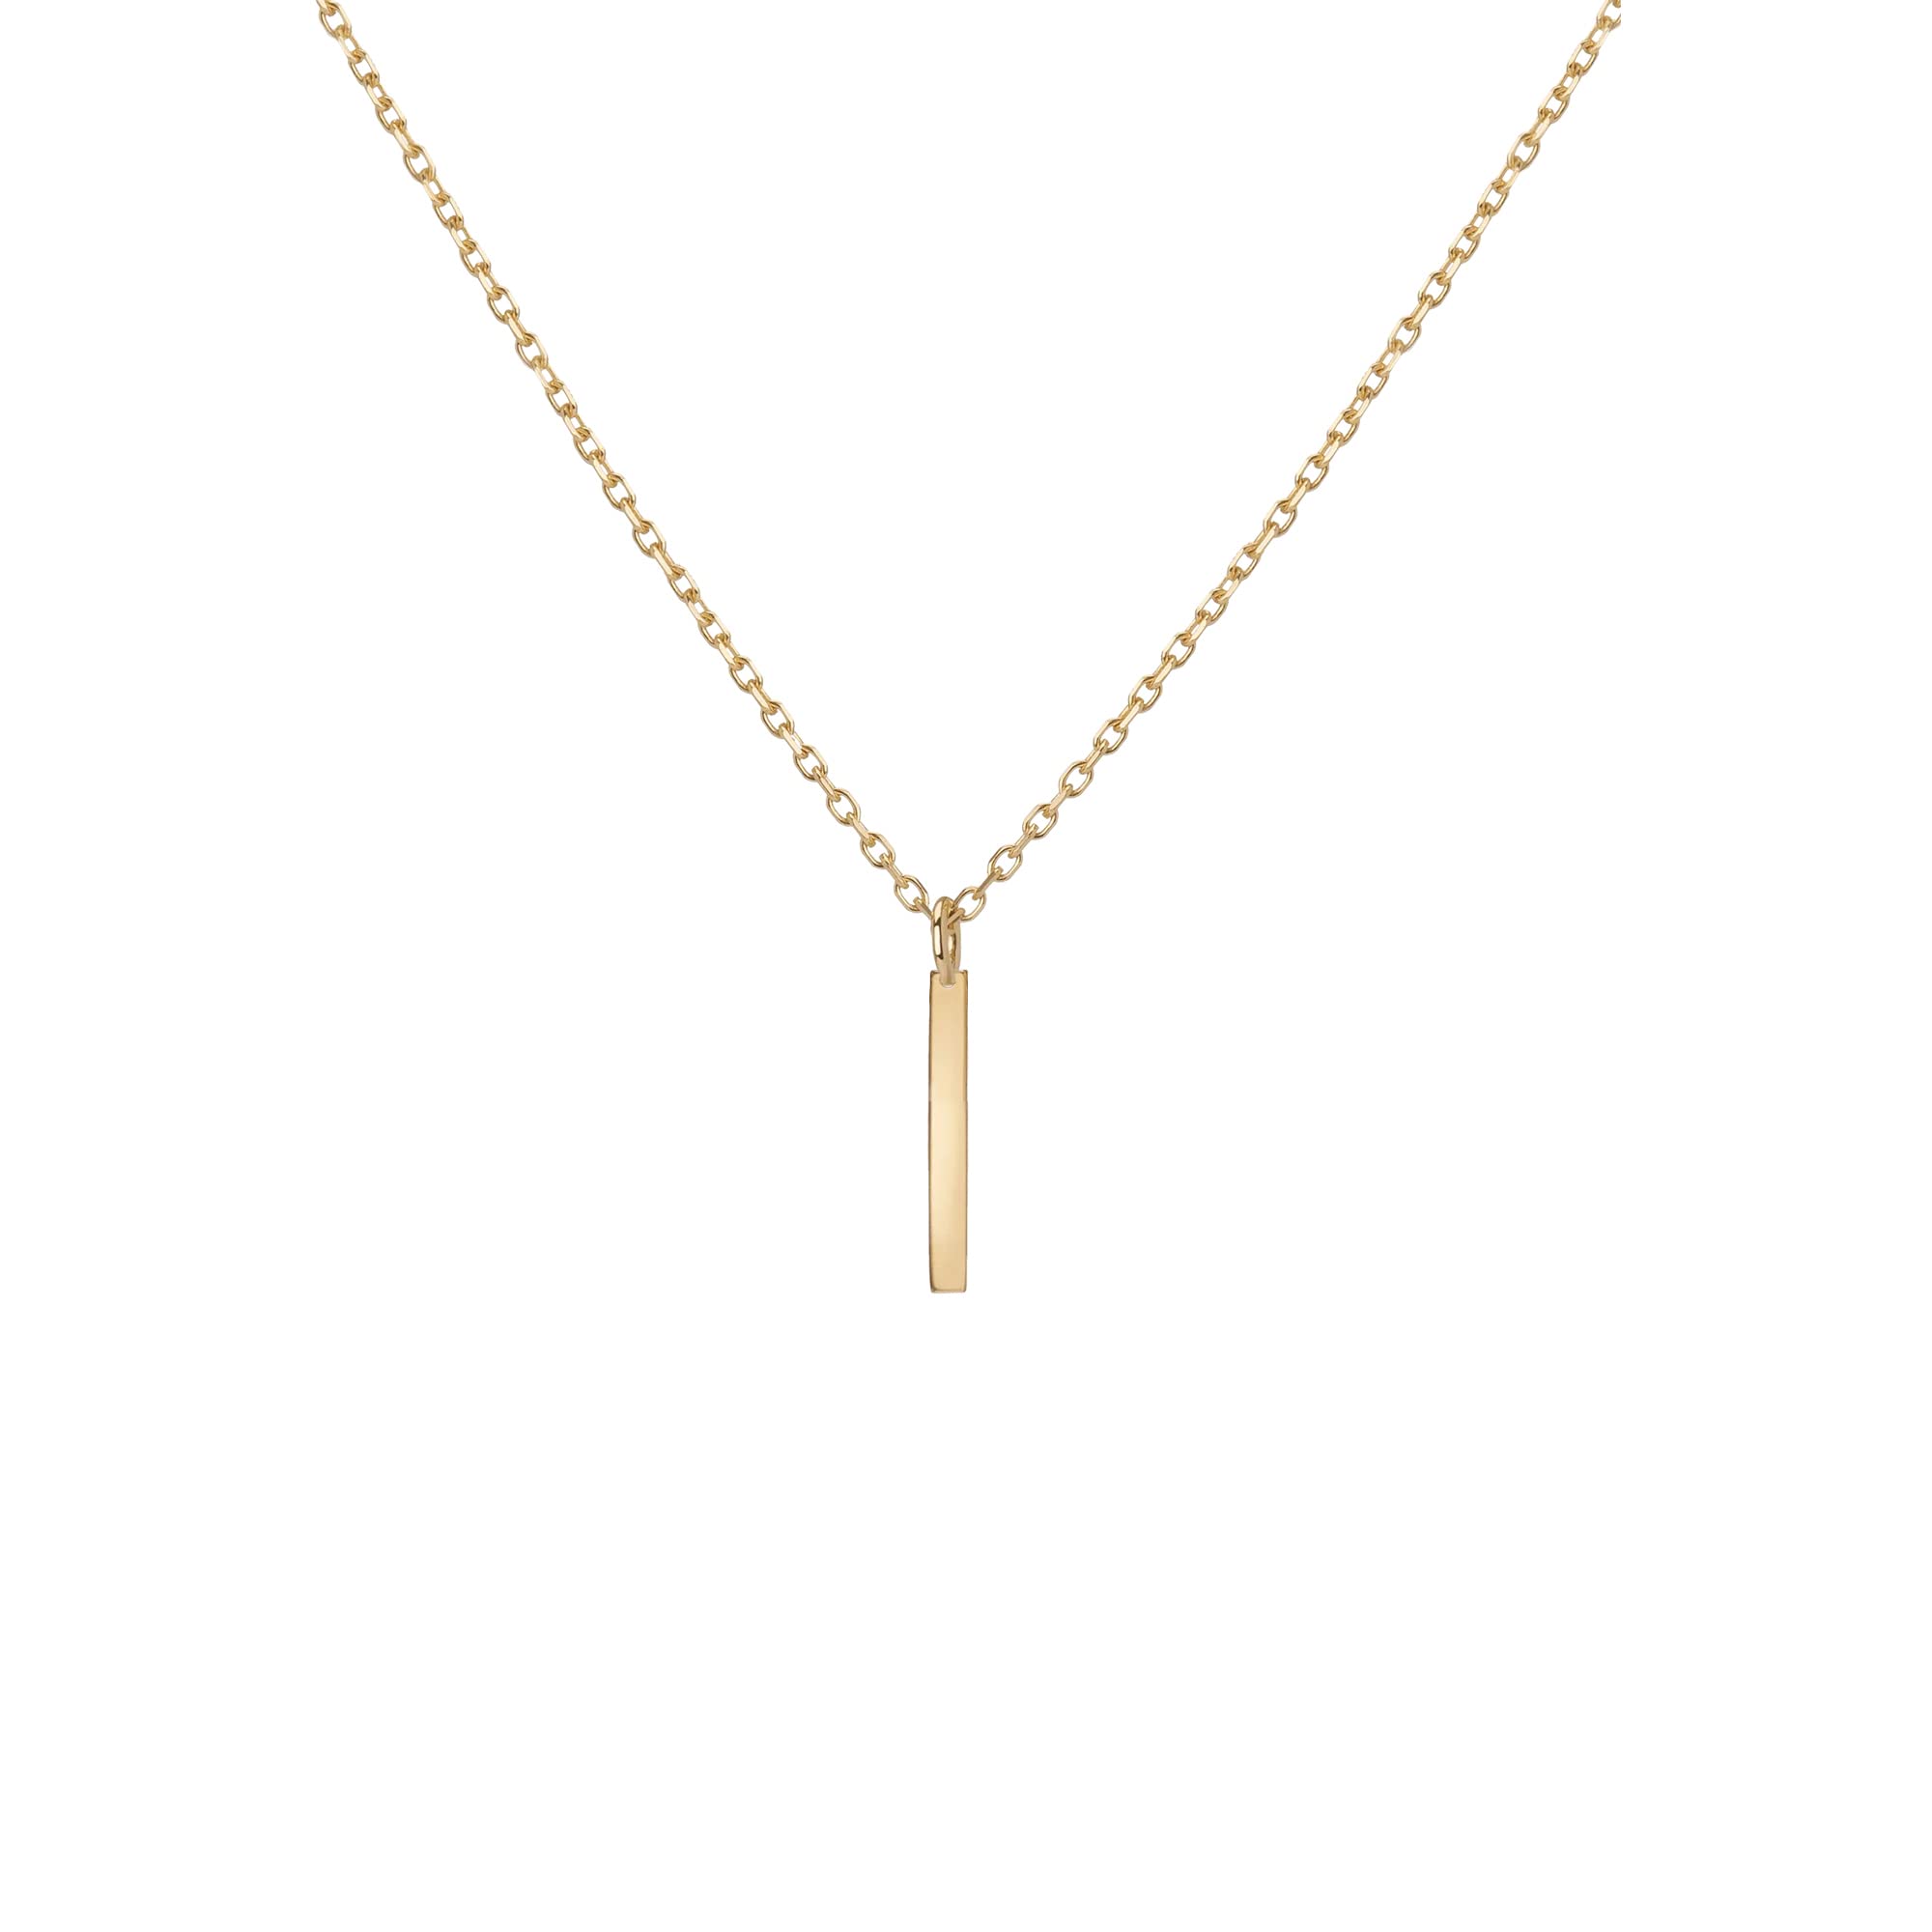 Aghfacy Dainty Bar Necklace for Women | Cute Bar Pendant Choker | Bar Necklace Gold | Tiny Bar Pendant Necklaces | Layered Bar Necklace